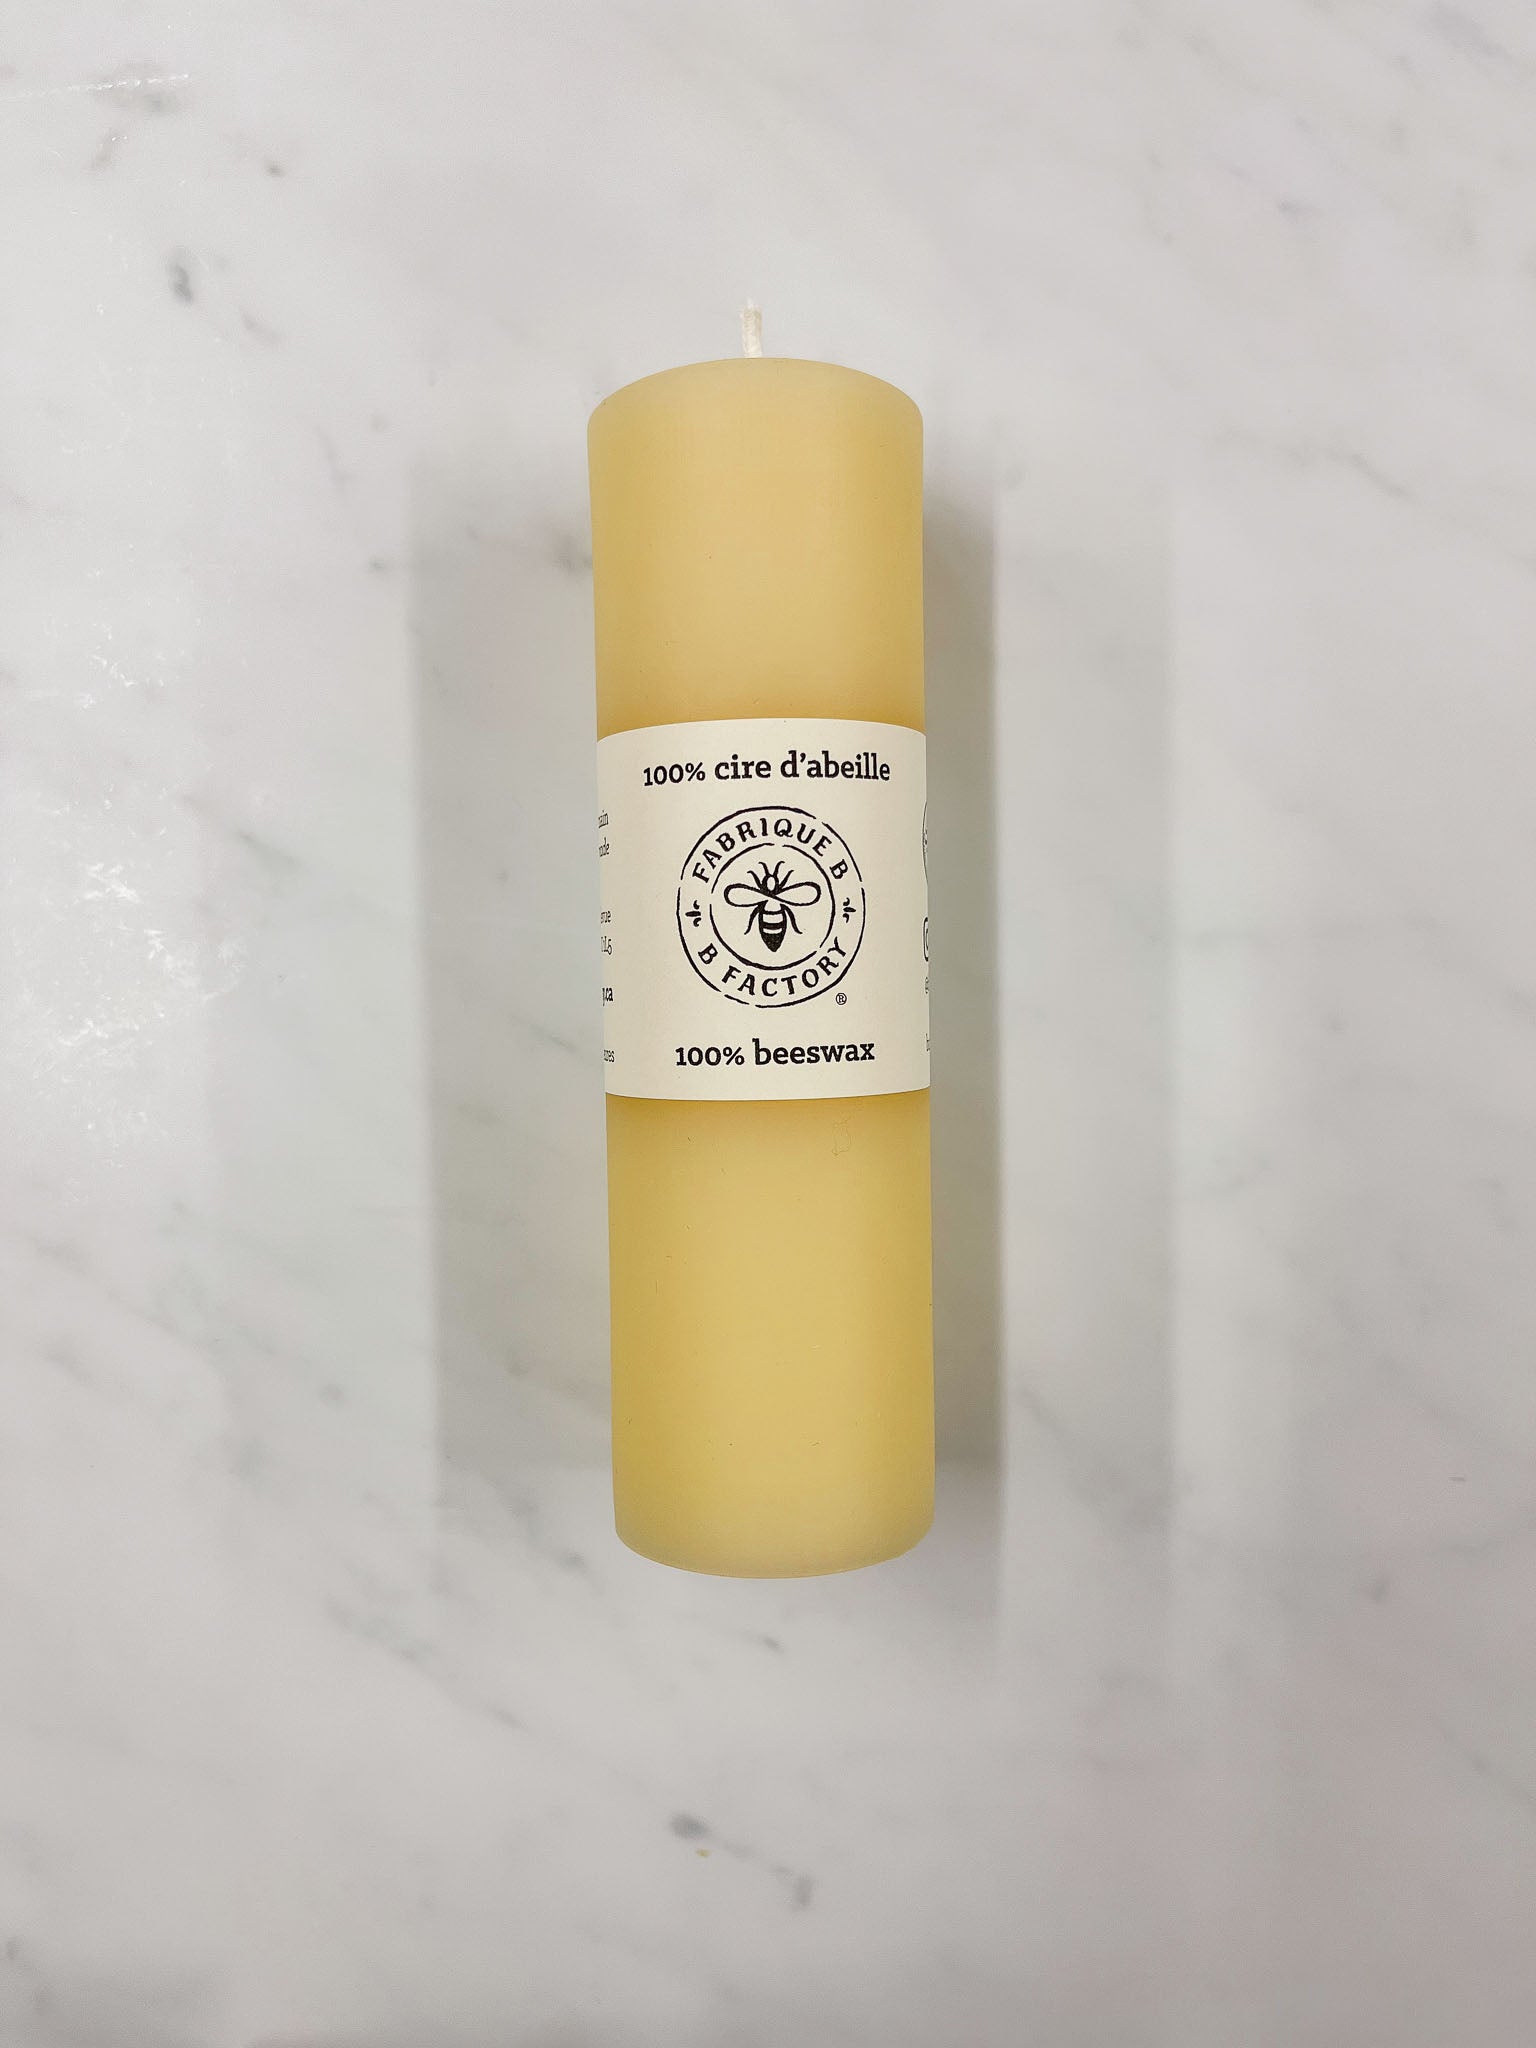 Slim pure beeswax pillar candle with B Factory logo